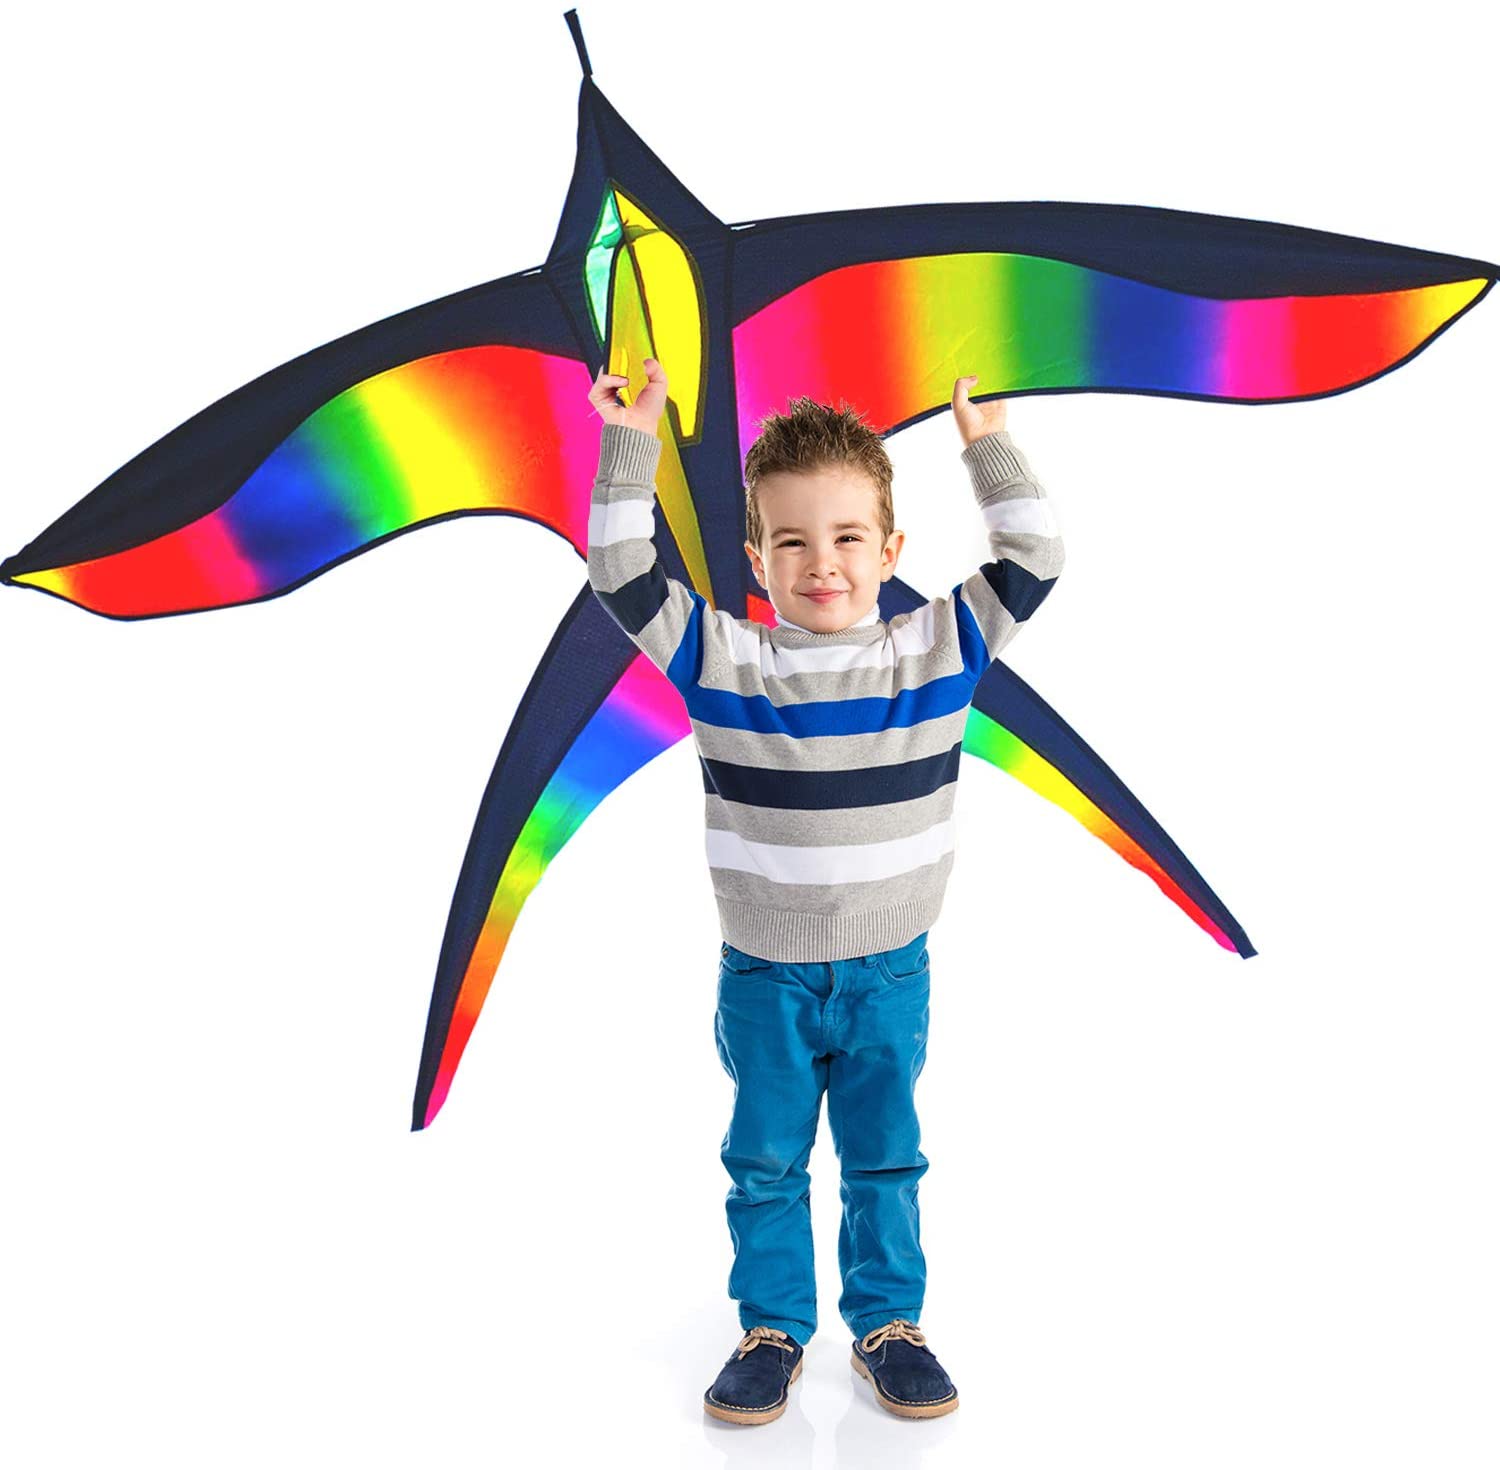 Stoie's Bird Kite – Huge Kite - Ideal for Kids and Adults